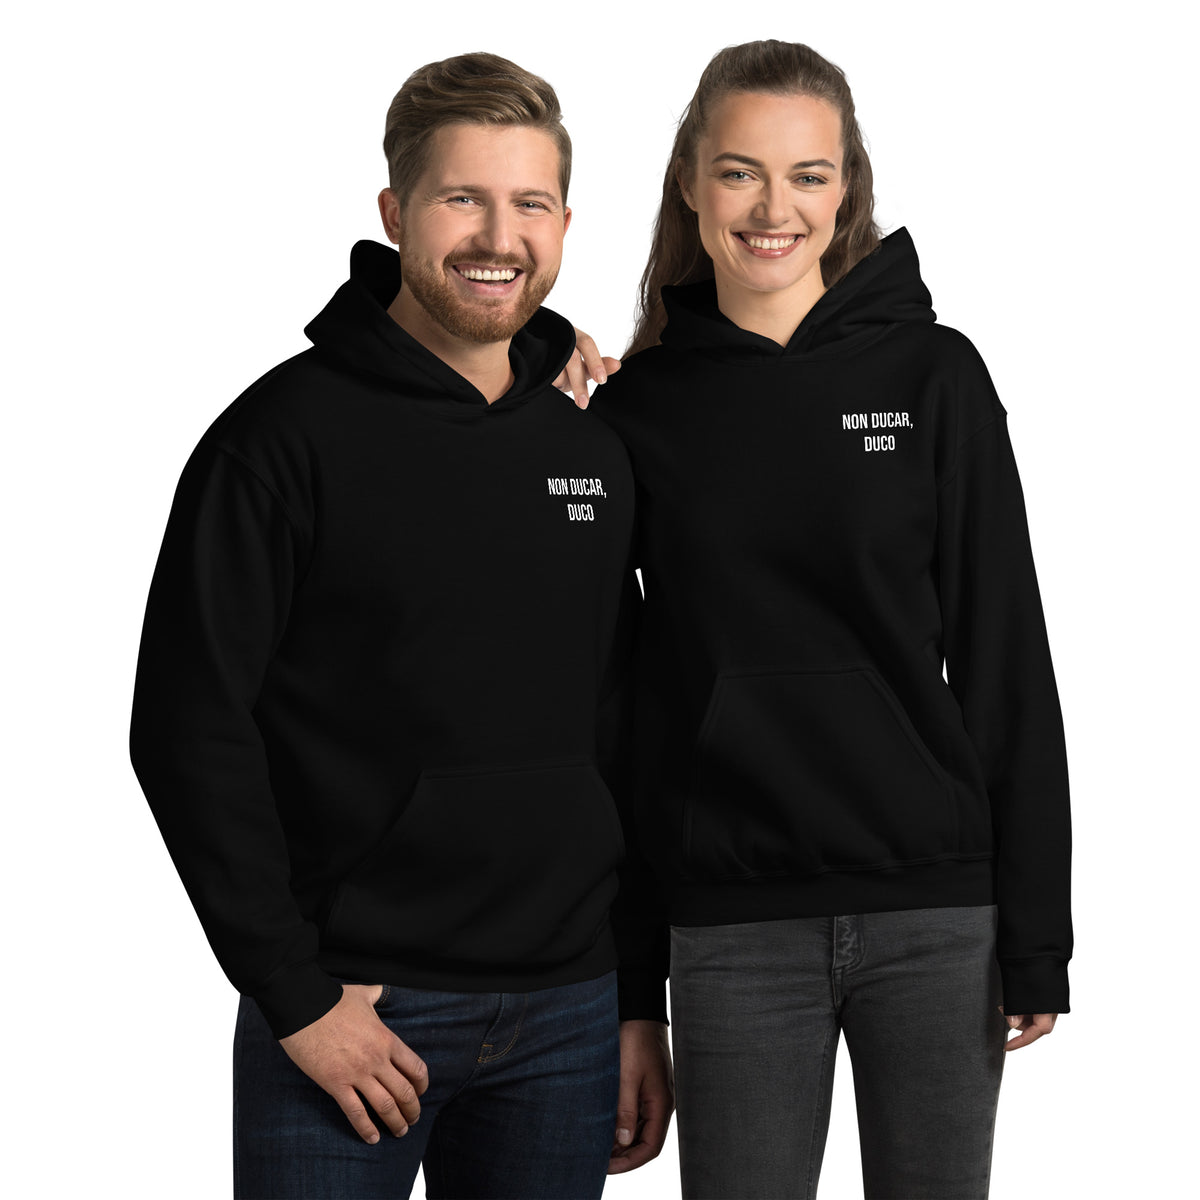 Te Futueo Et Caballum Tuum (Screw you, and the horse you rode in on) Unisex Hoodie